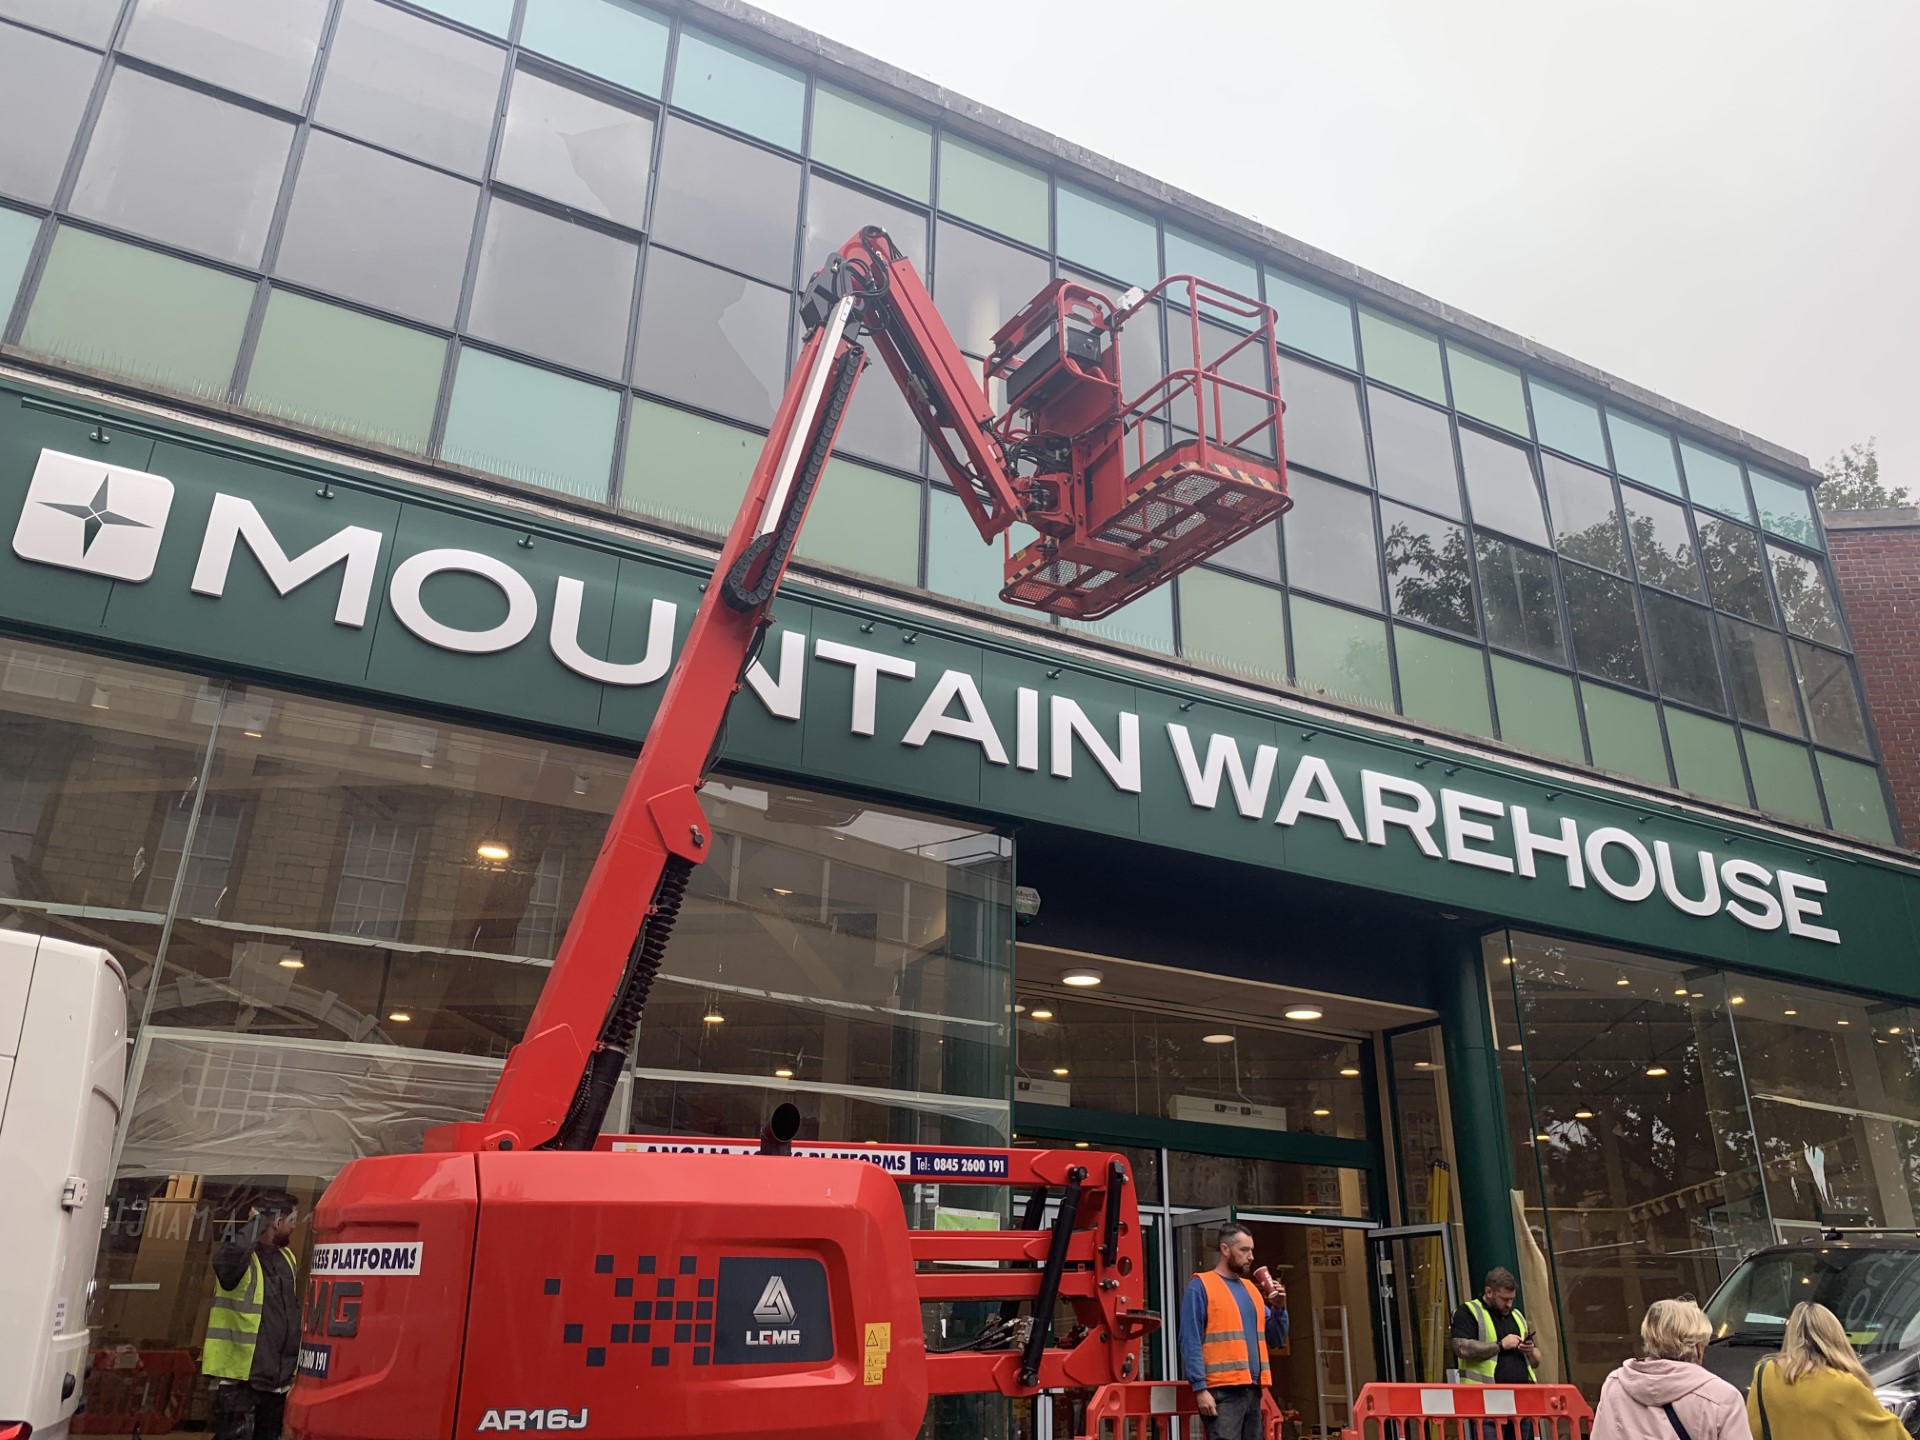 Mountain Warehouse Norwich building is up for sale